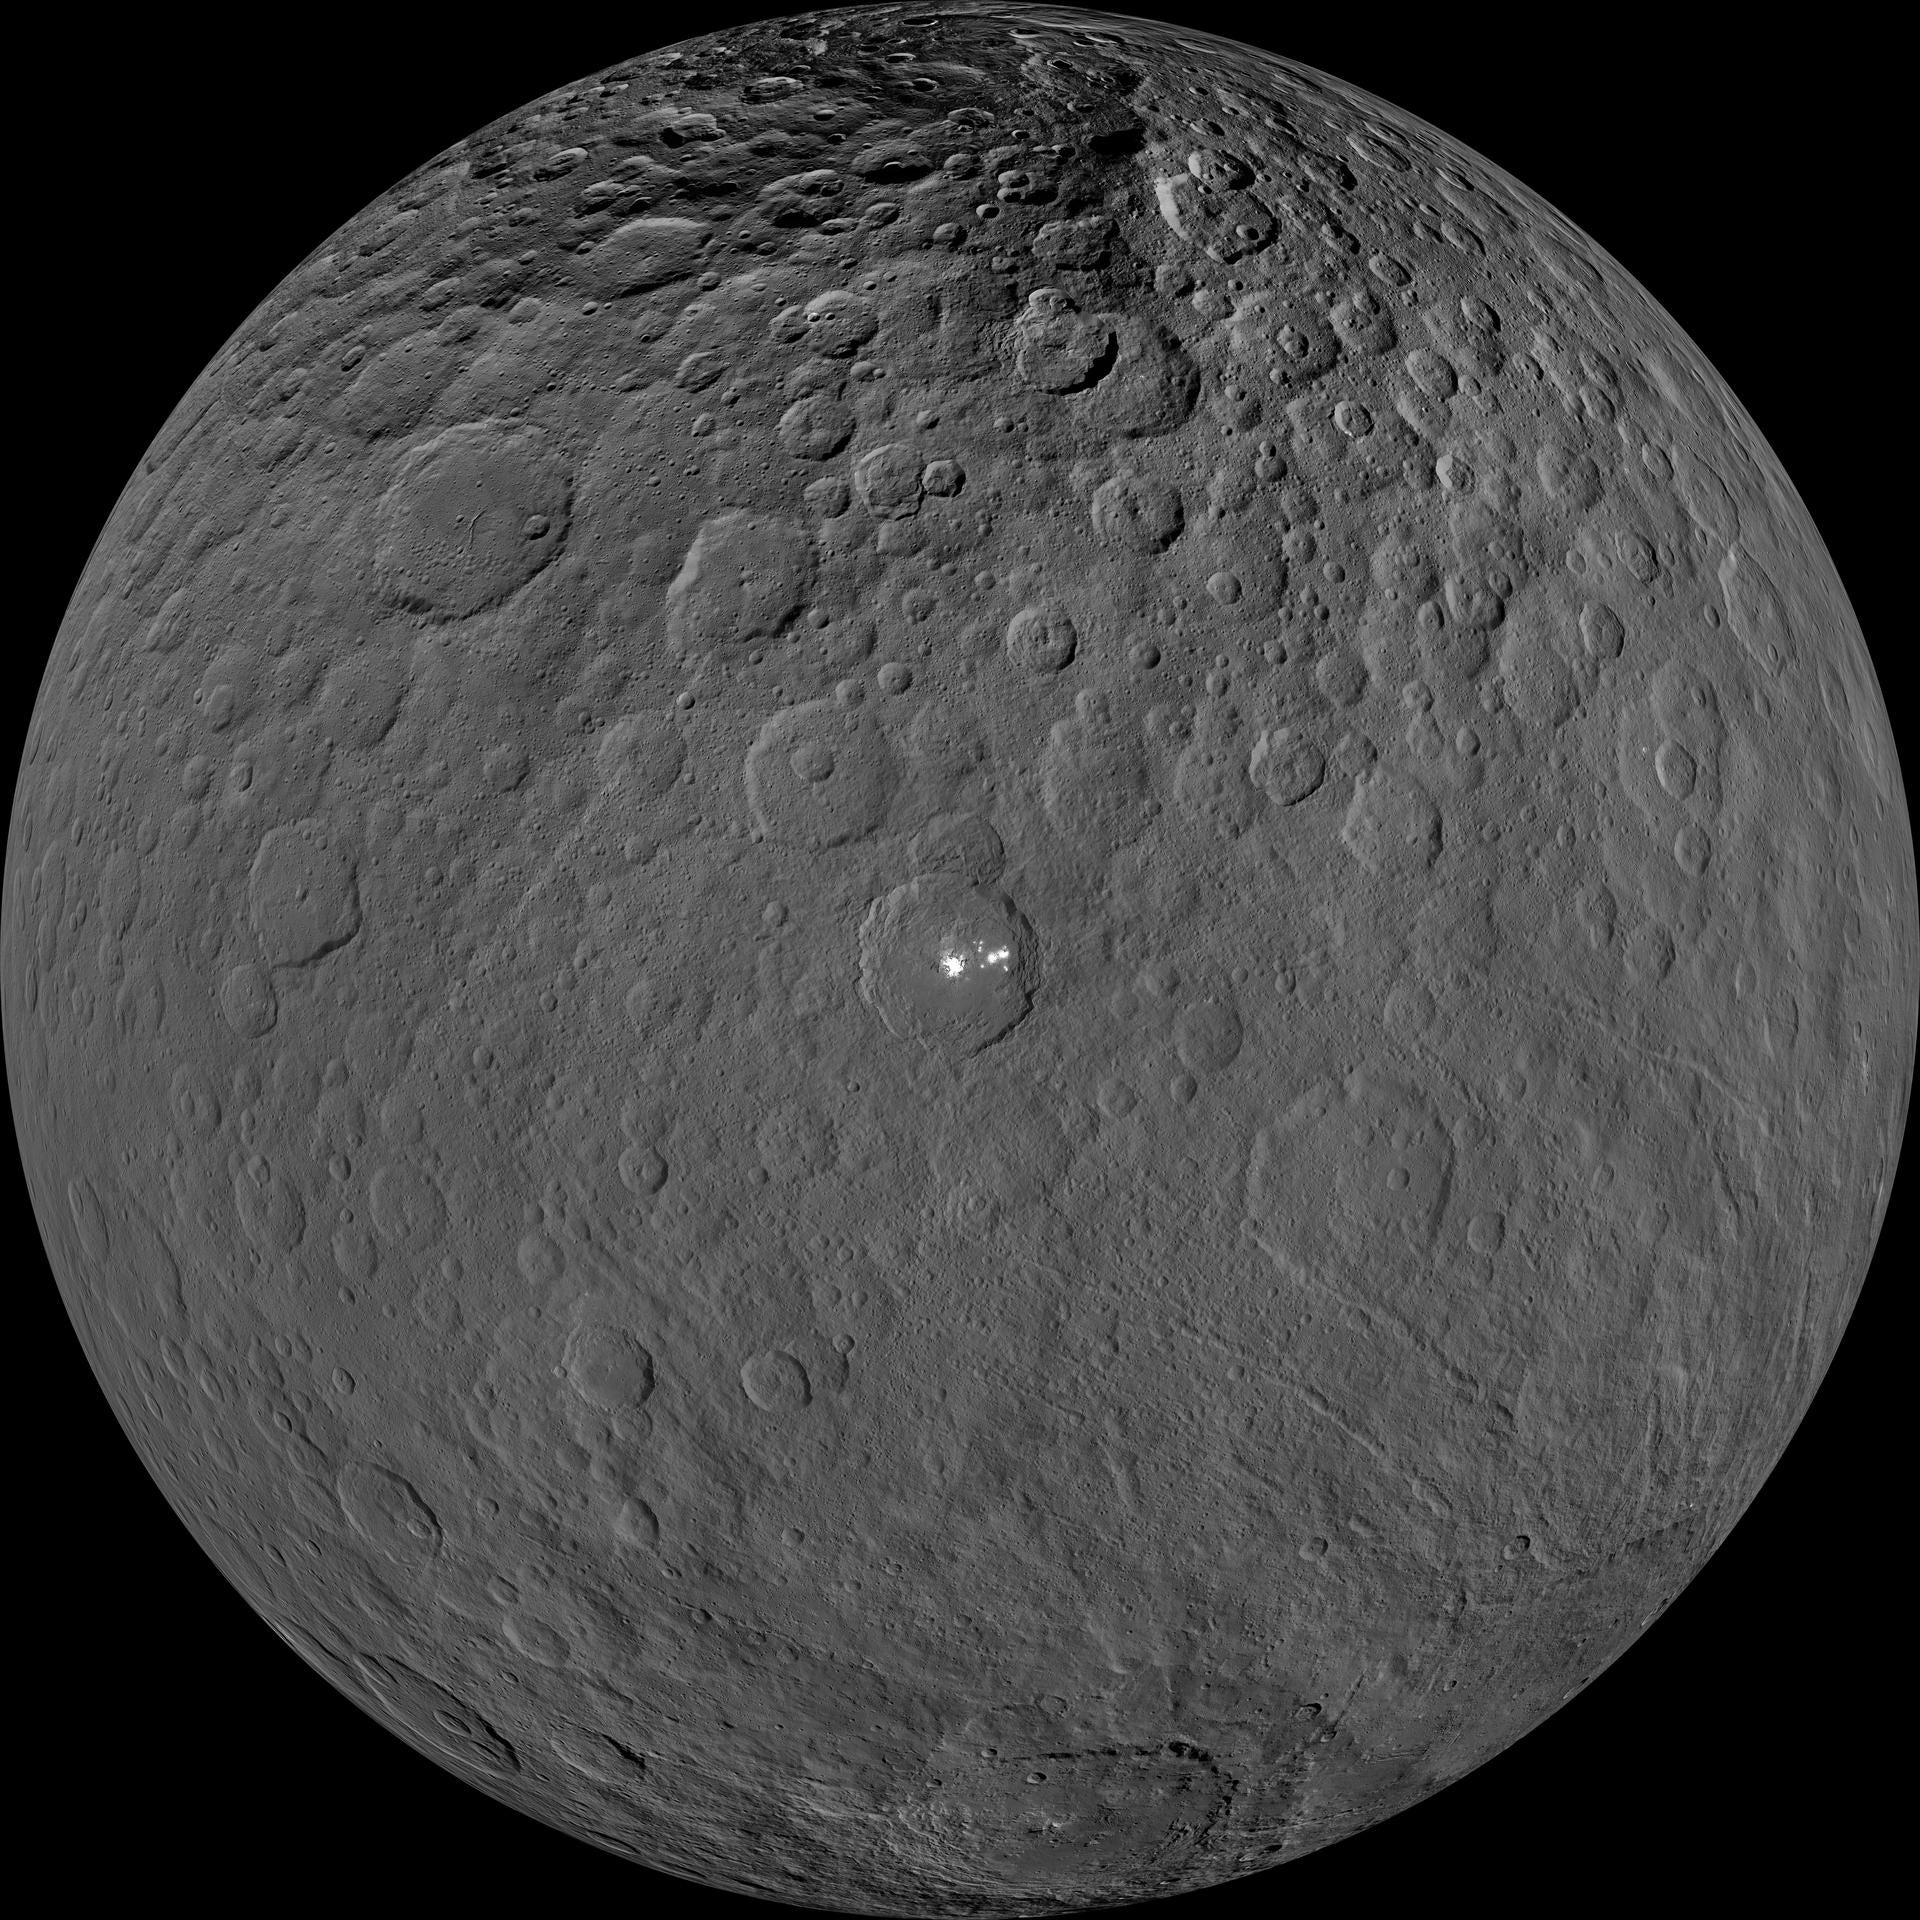 The dwarf planet Ceres in the main asteroid belt